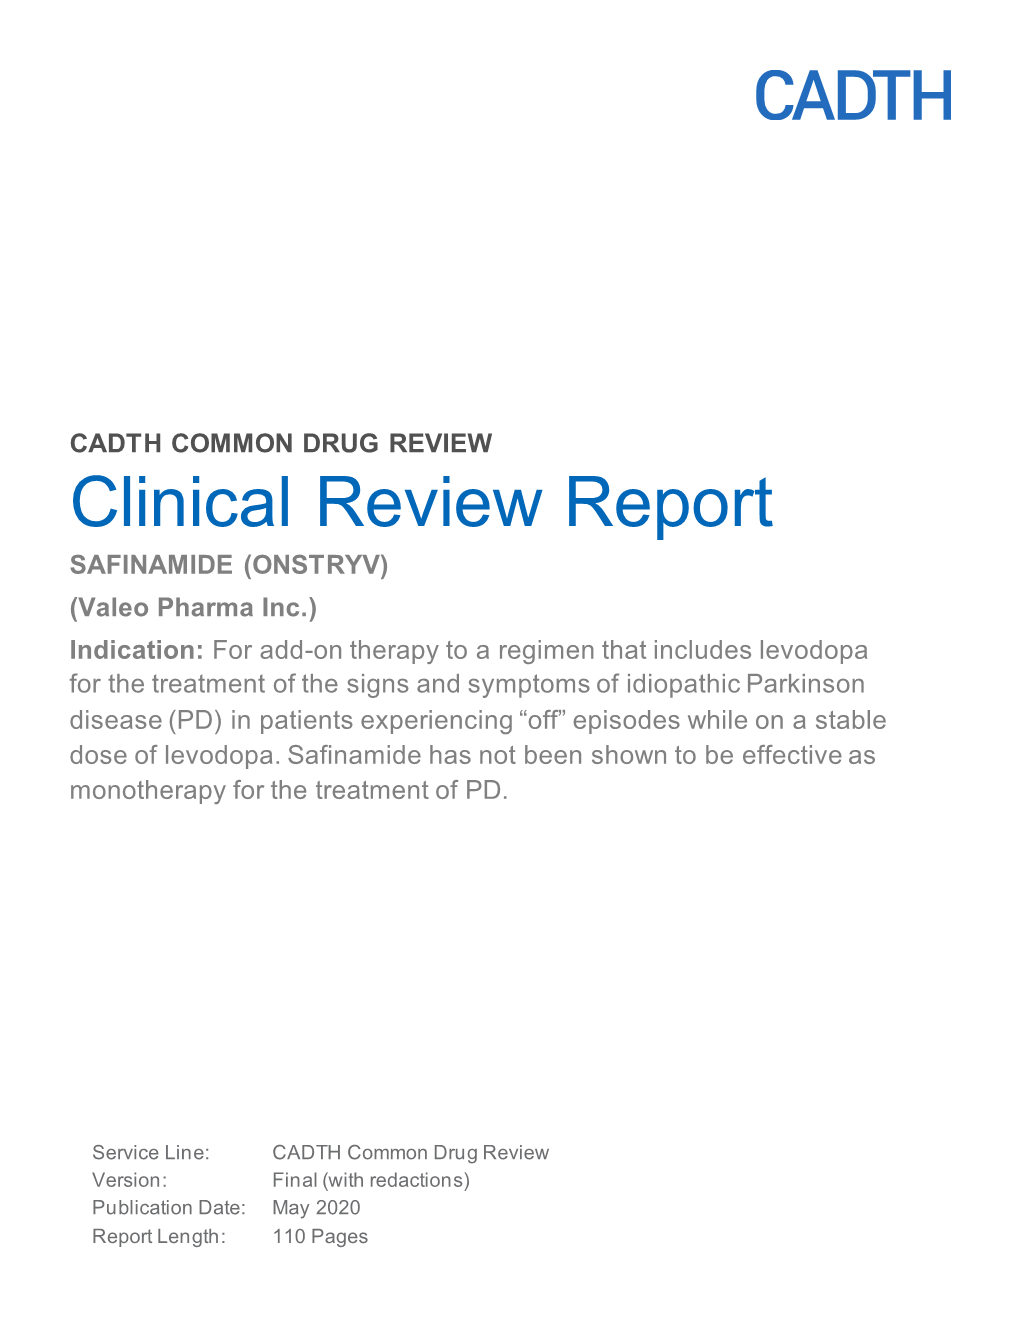 CDR Clinical Review Report for Onstryv